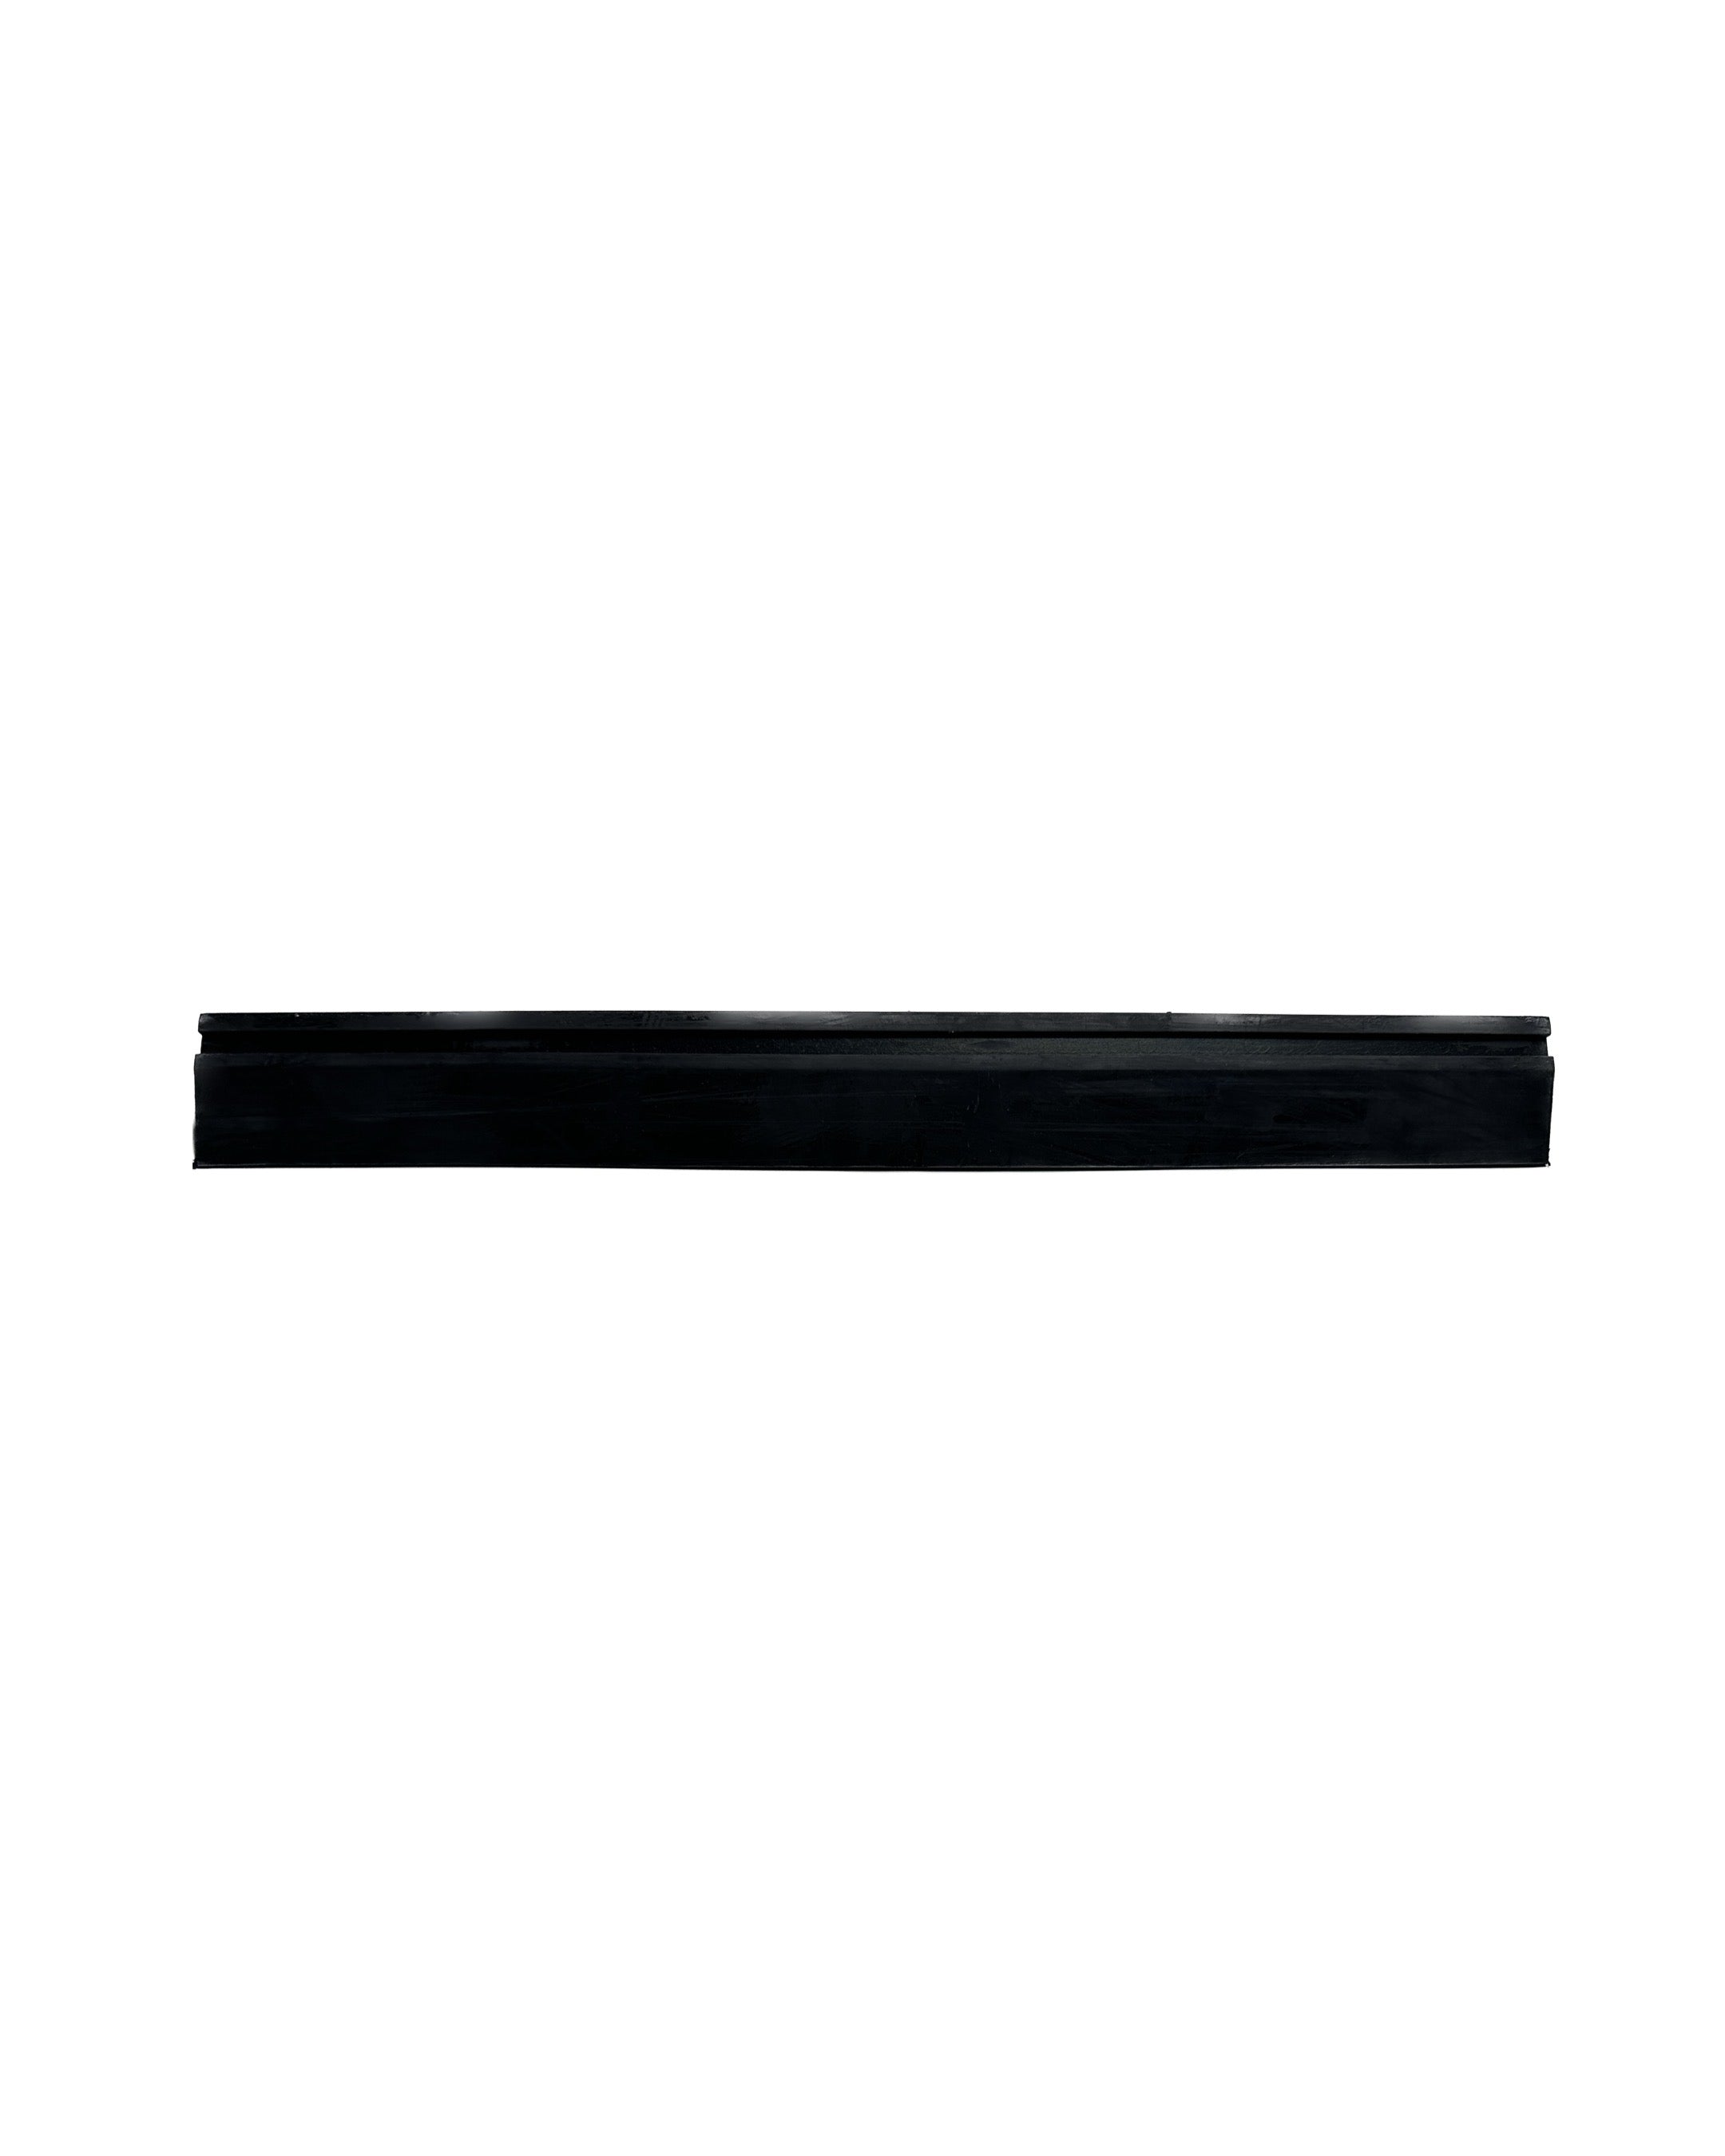 15” Black Smoothee Squeegee